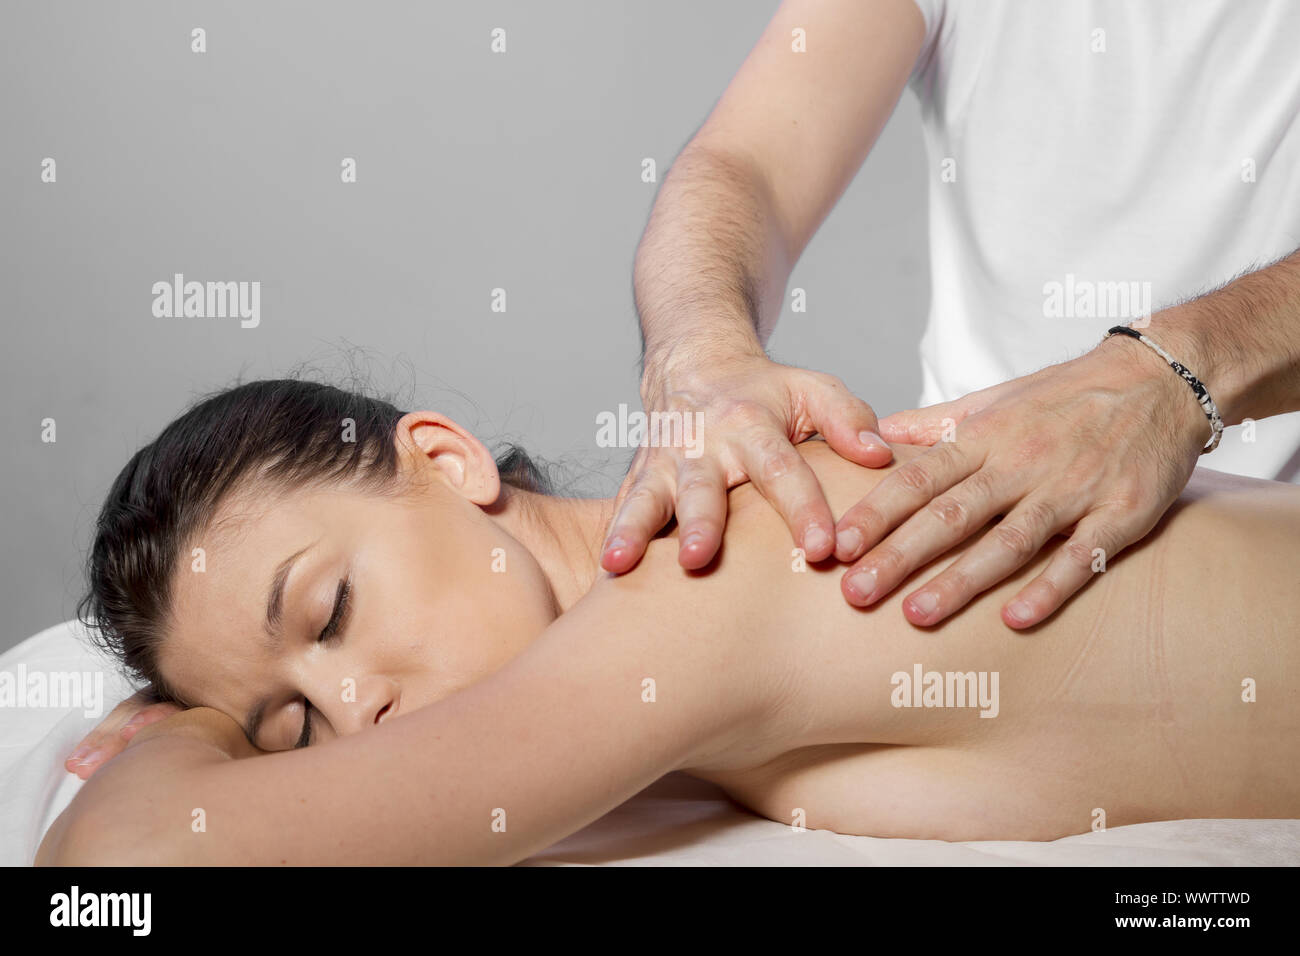 Healthy and relaxation, beautiful brunette woman relaxing on a stretcher receiving a therapeutic massage from hands of a profess Stock Photo